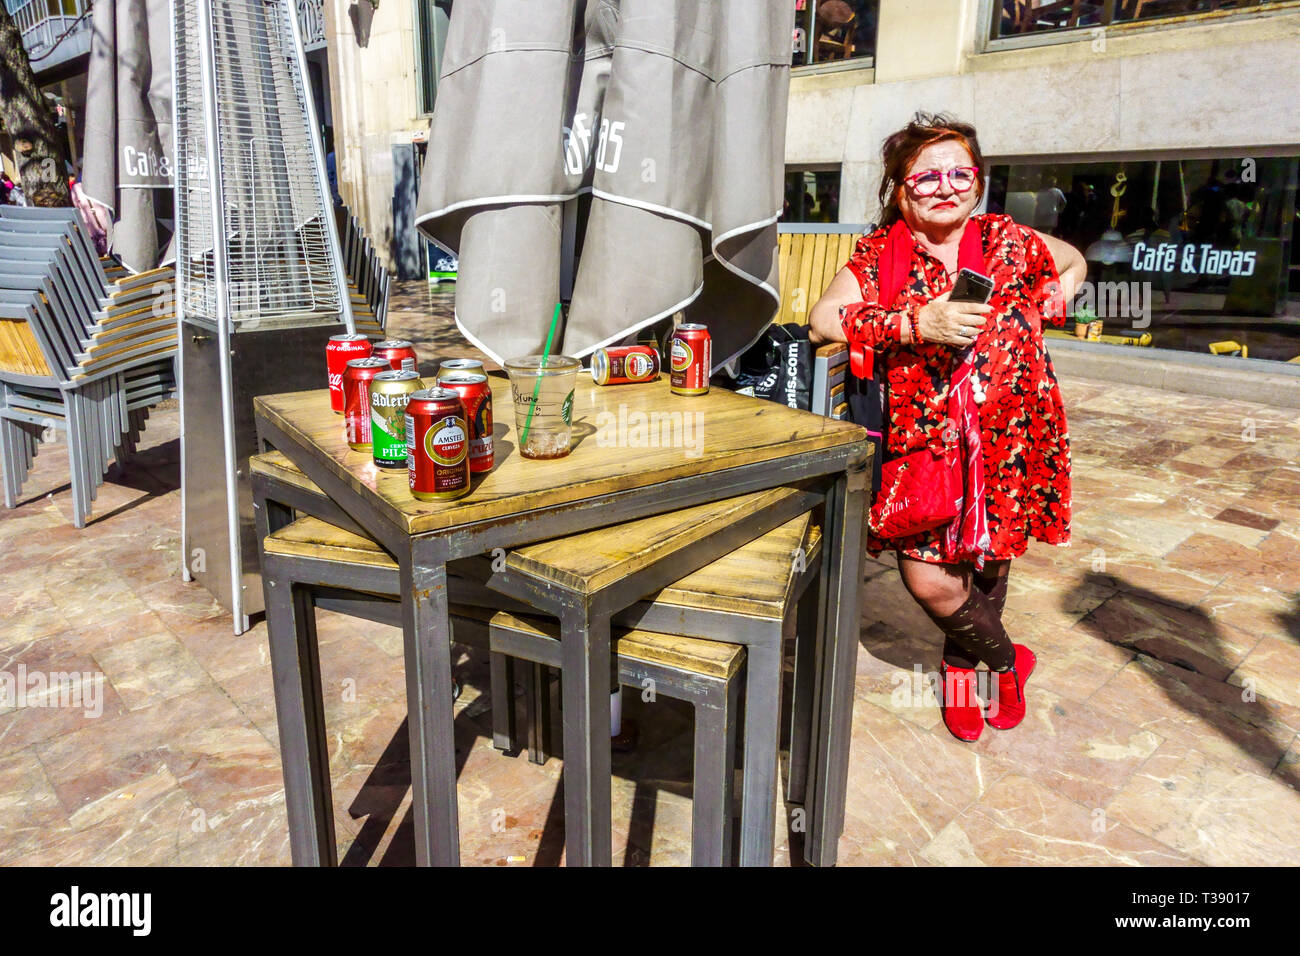 Portrait of woman in red in front of bar Cafe & Tapas, Plaça de l'Ajuntament, Town hall Square, Valencia Spain Europe Stock Photo